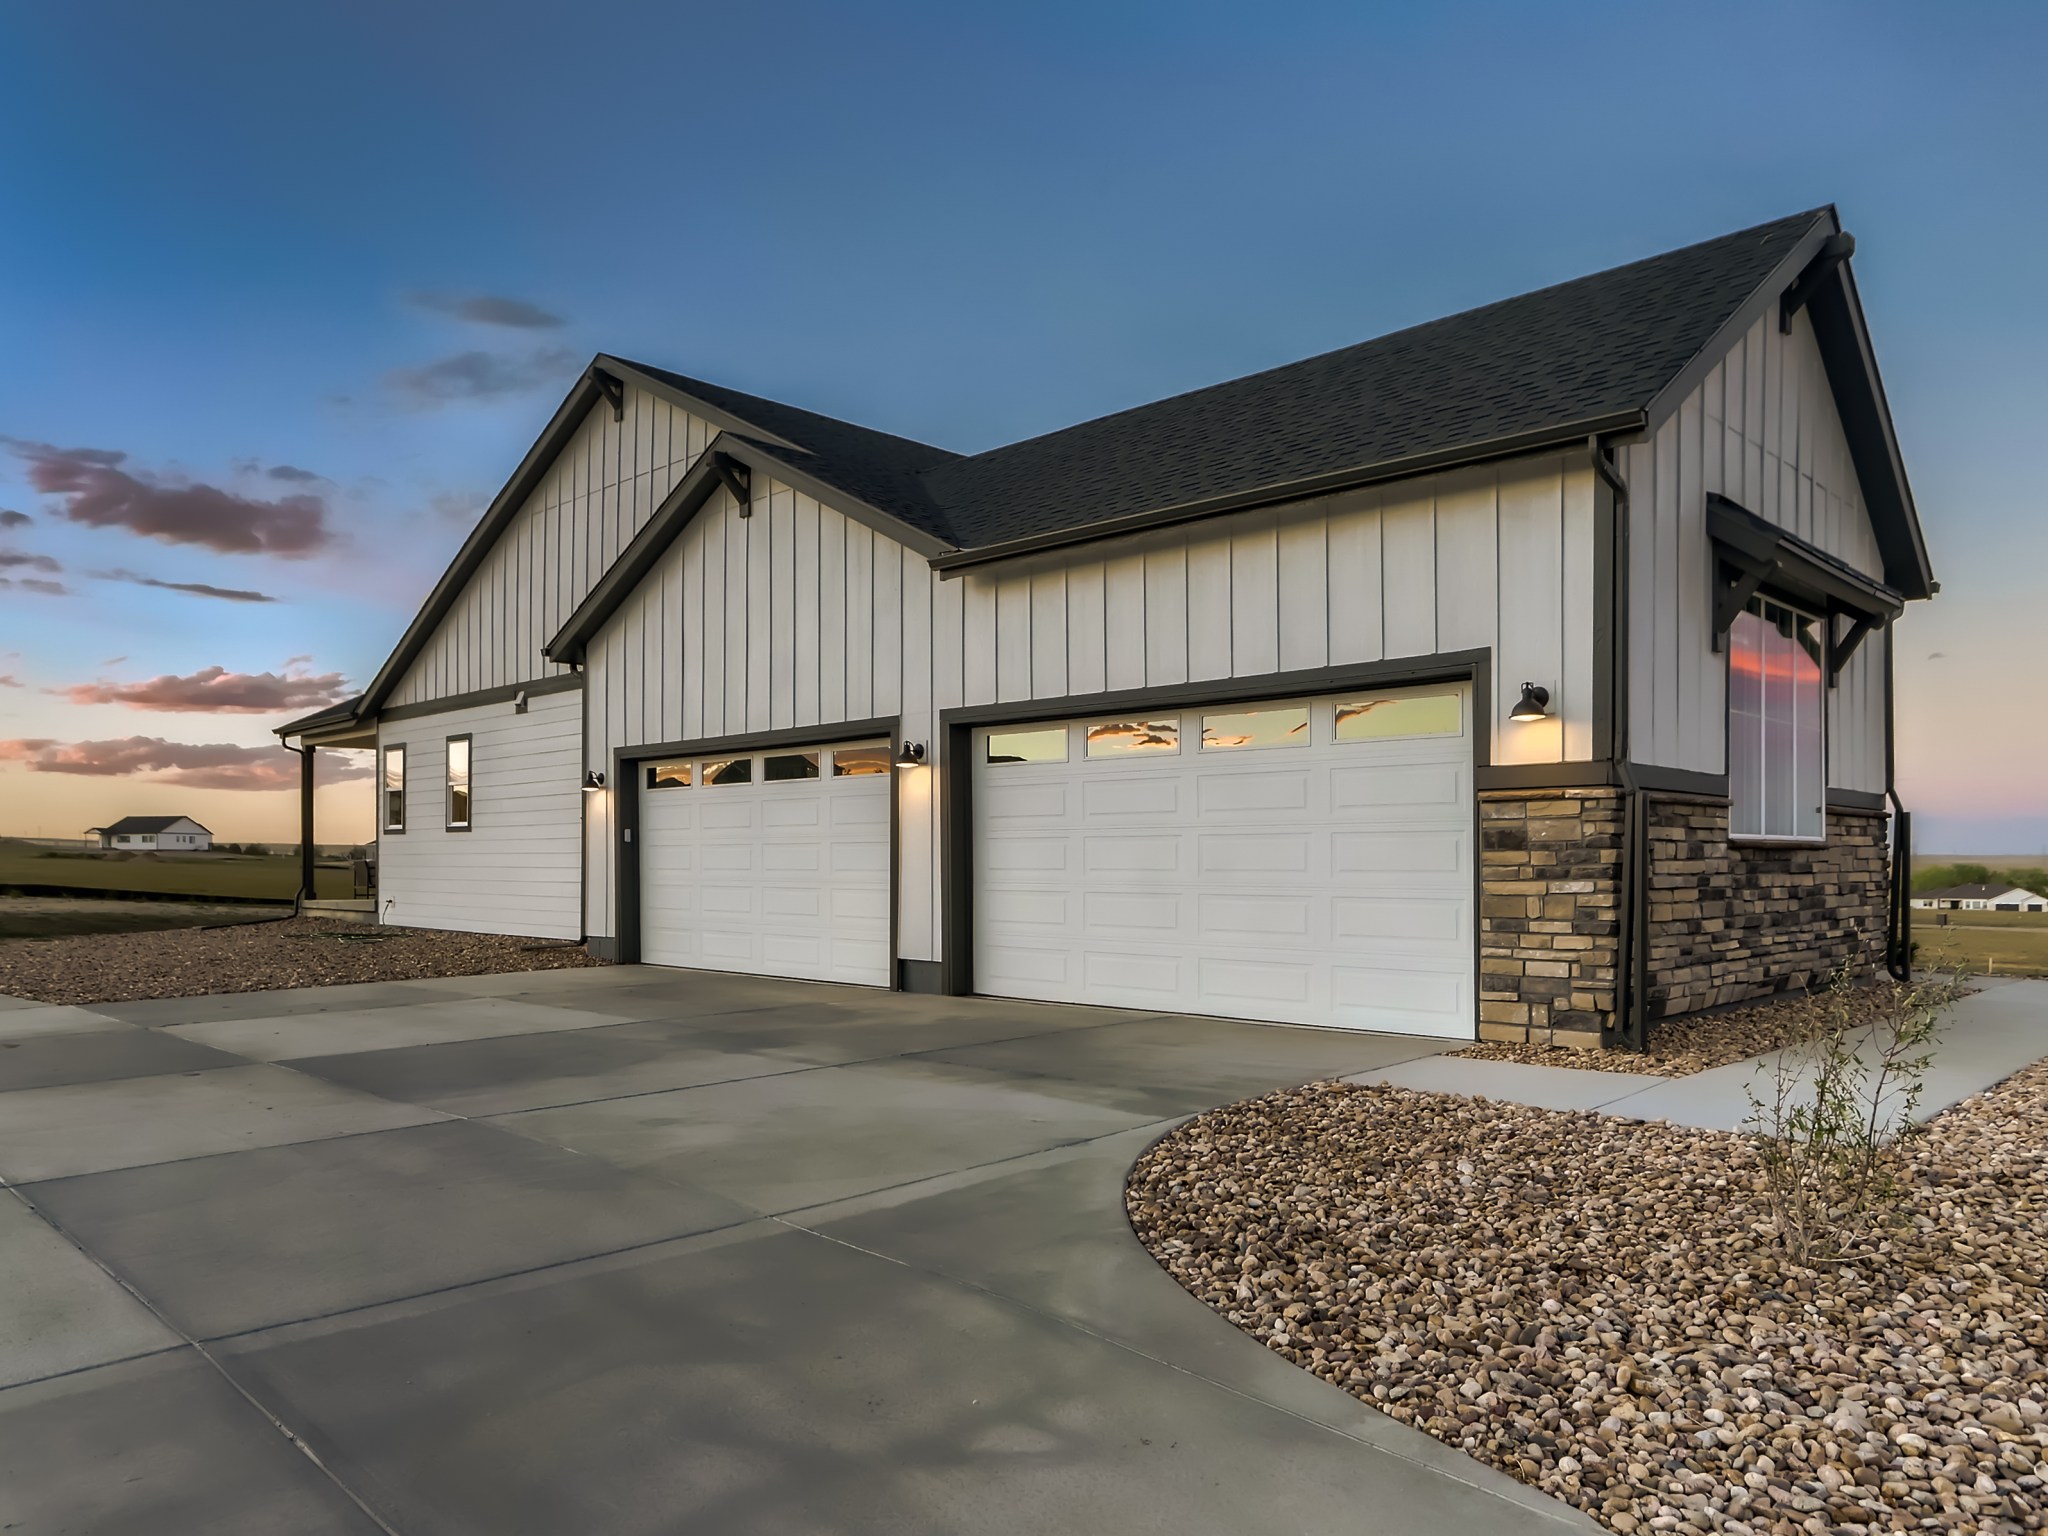 Welcome to 2640 Branding Iron Drive in the picturesque town of Severance, CO! This stunning model home is currently under construction and sits on a sprawling 2.31-acre homesite. With 4 bedrooms, 4 bathrooms, and 4,248 square feet of living space, this home is a true gem waiting for you to make it yours. As you step inside, you will be immediately drawn to the luxurious finishes and contemporary elements that adorn this home. The spacious and inviting floor plan boasts a study, rear covered patio, and a 4-car garage, making it perfect for families and those who love to entertain. The gourmet kitchen is a true chef's delight, complete with an expansive white quartz island that features luxurious veining throughout, 42